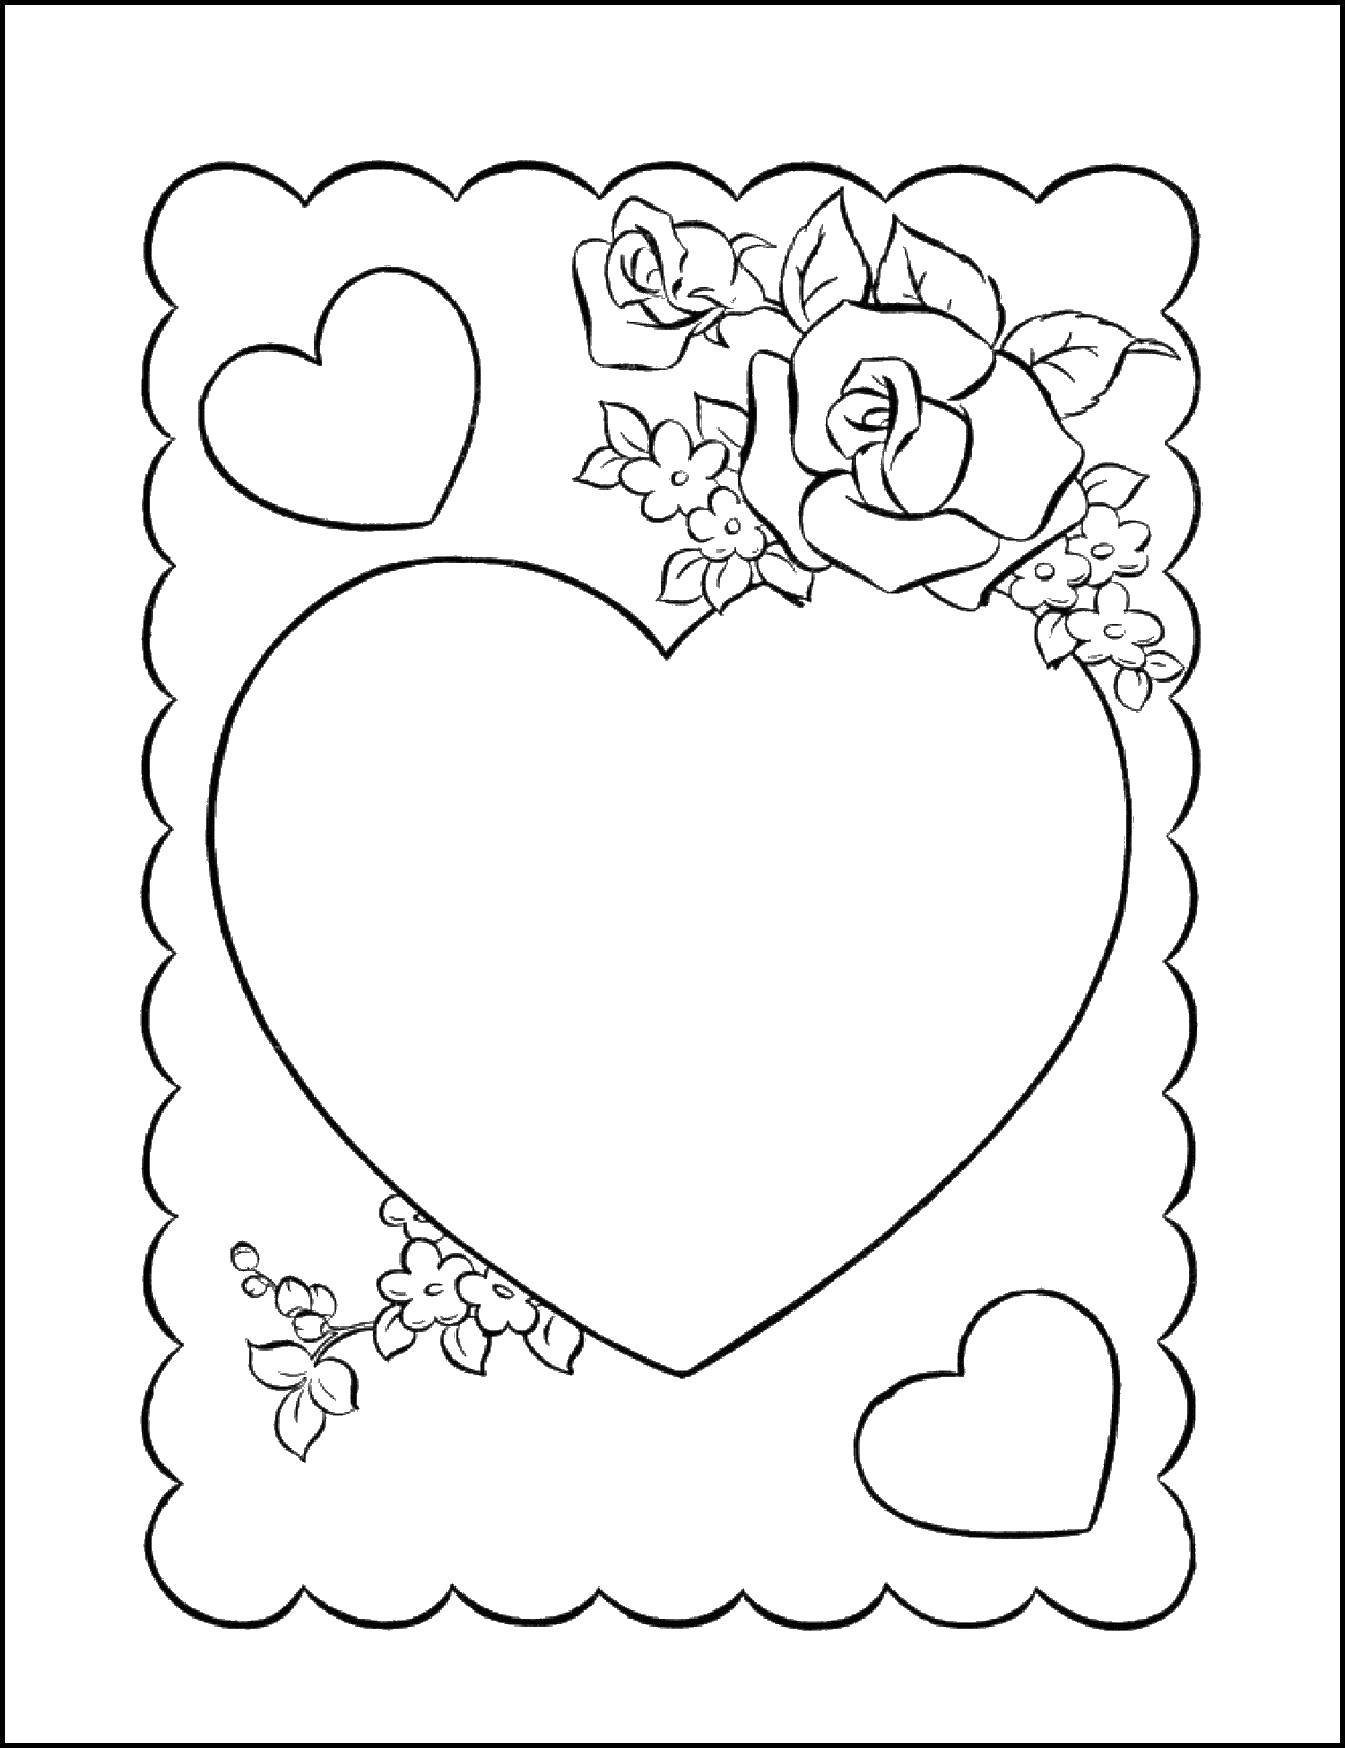 Coloring Heart with flowers. Category Valentines day. Tags:  Valentines day, love, heart.